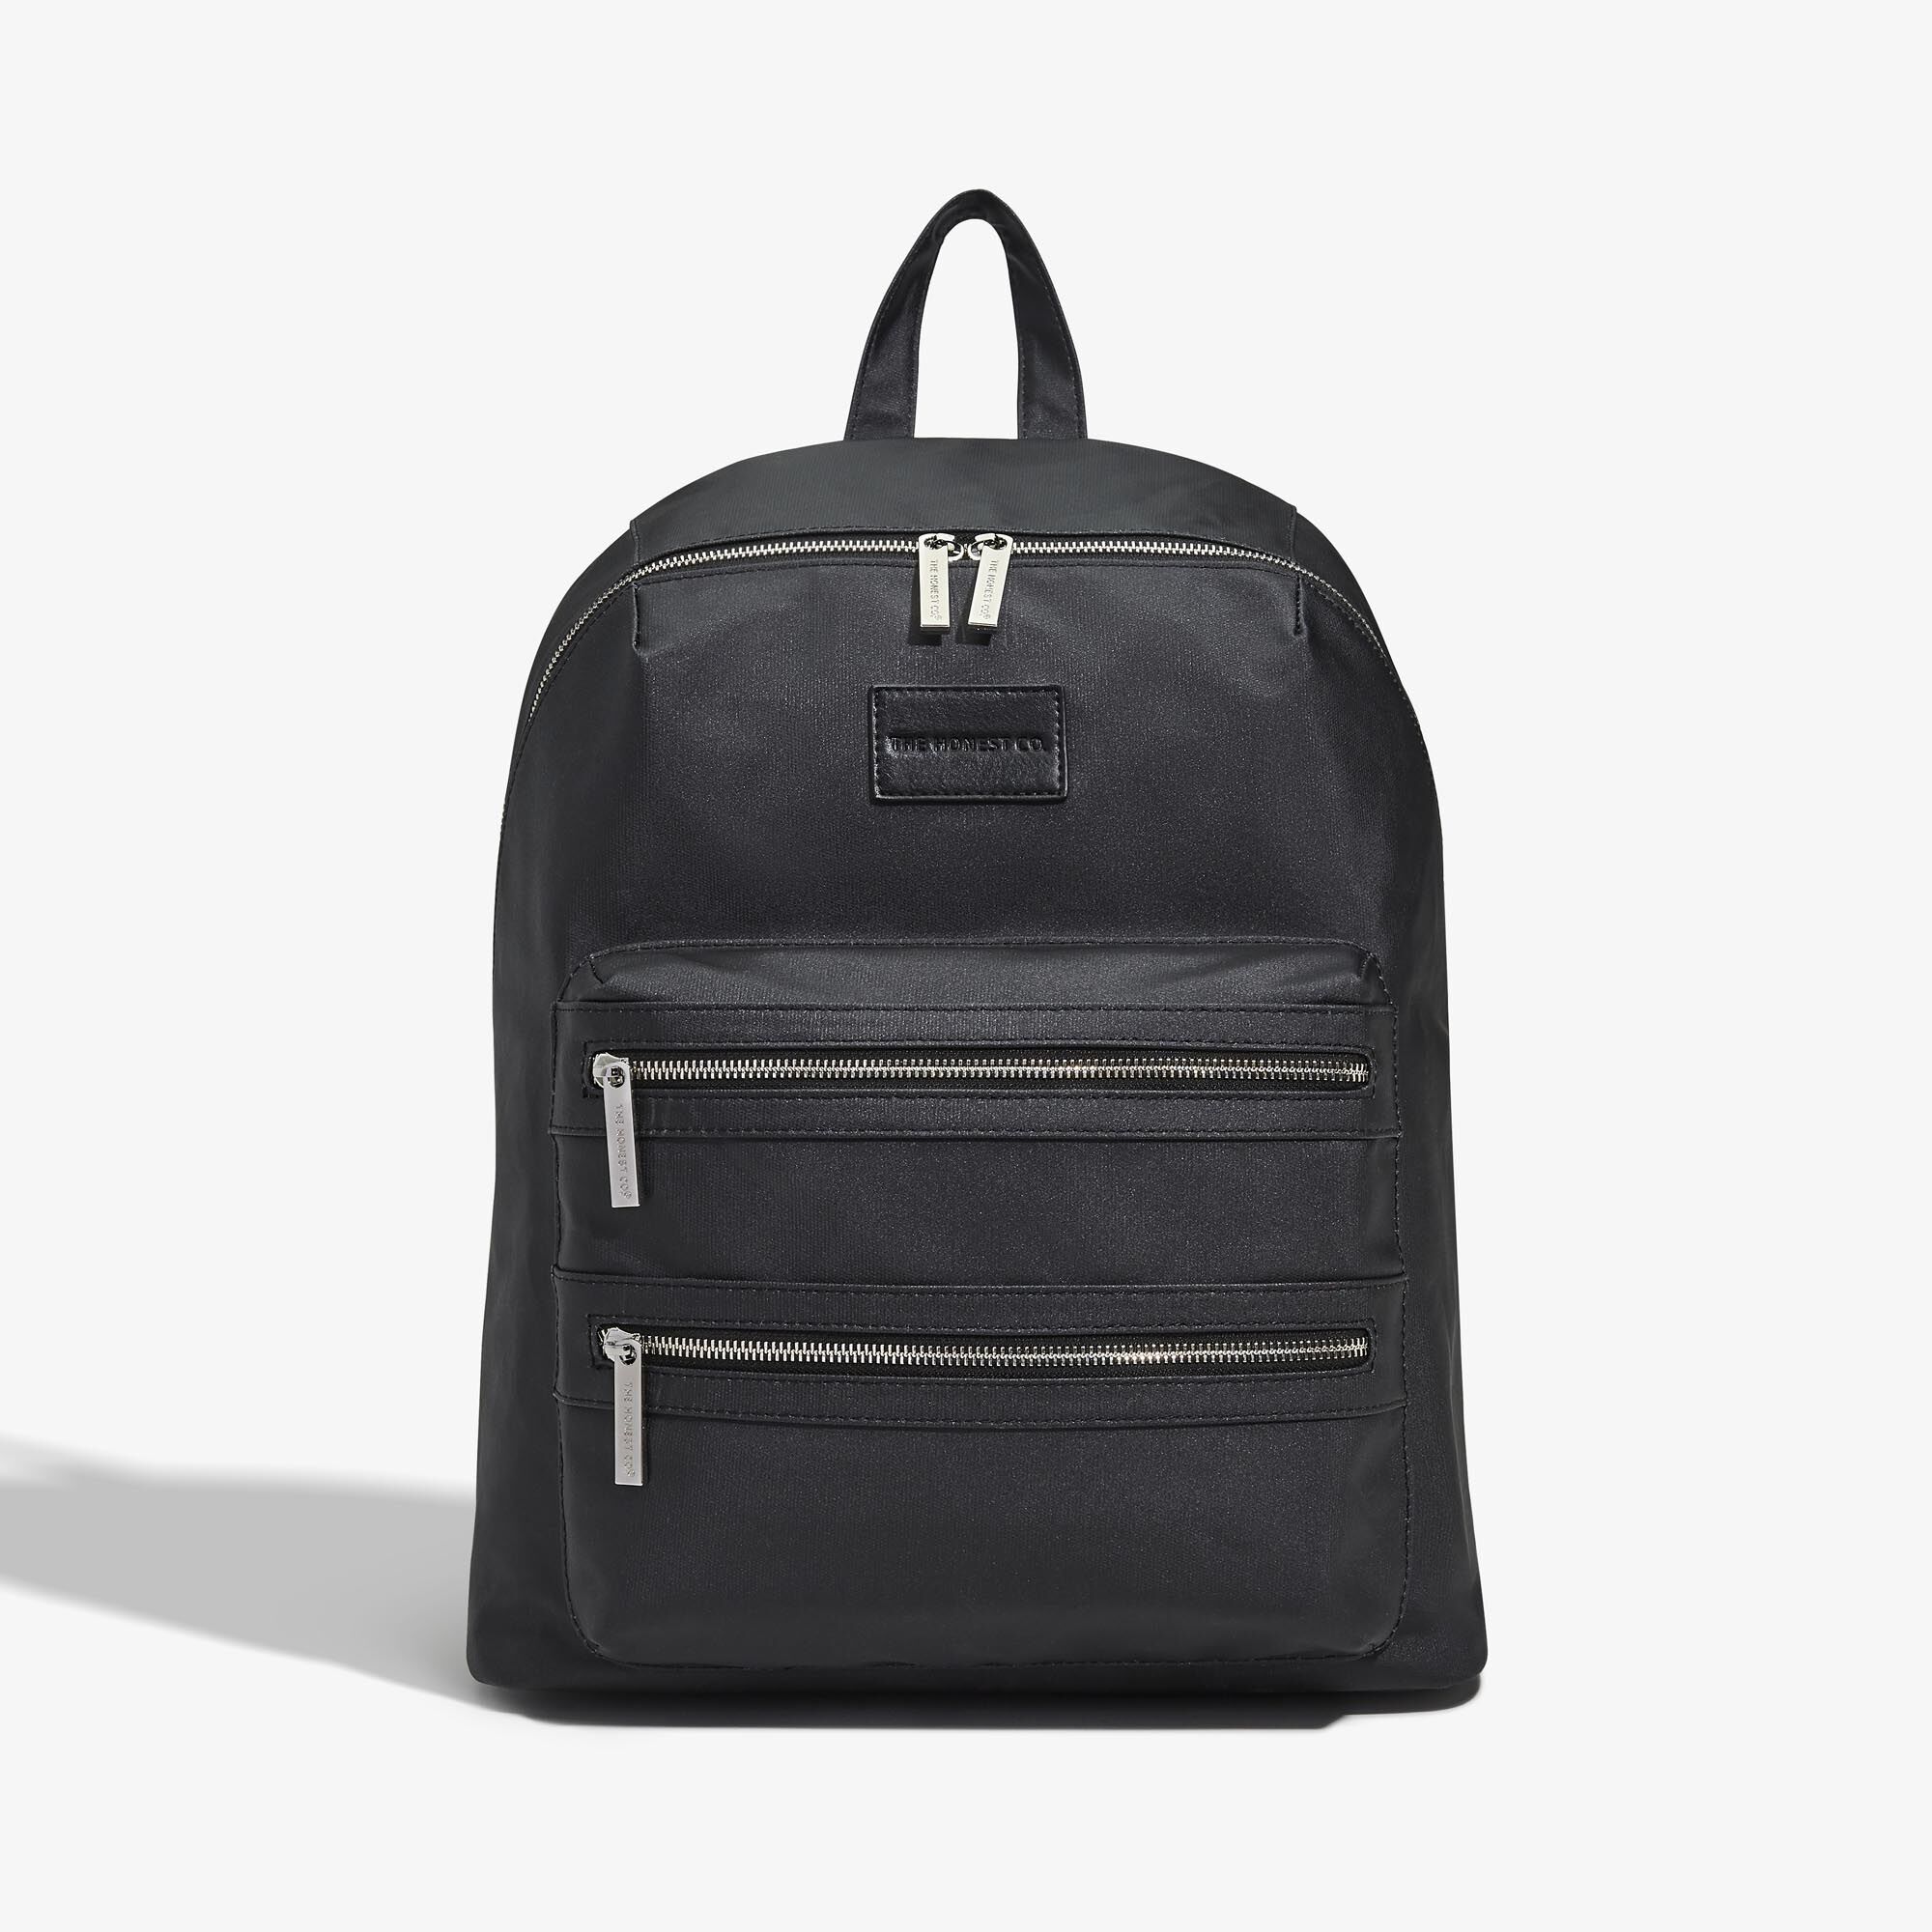 The Honest Company Uptown Canvas Backpack